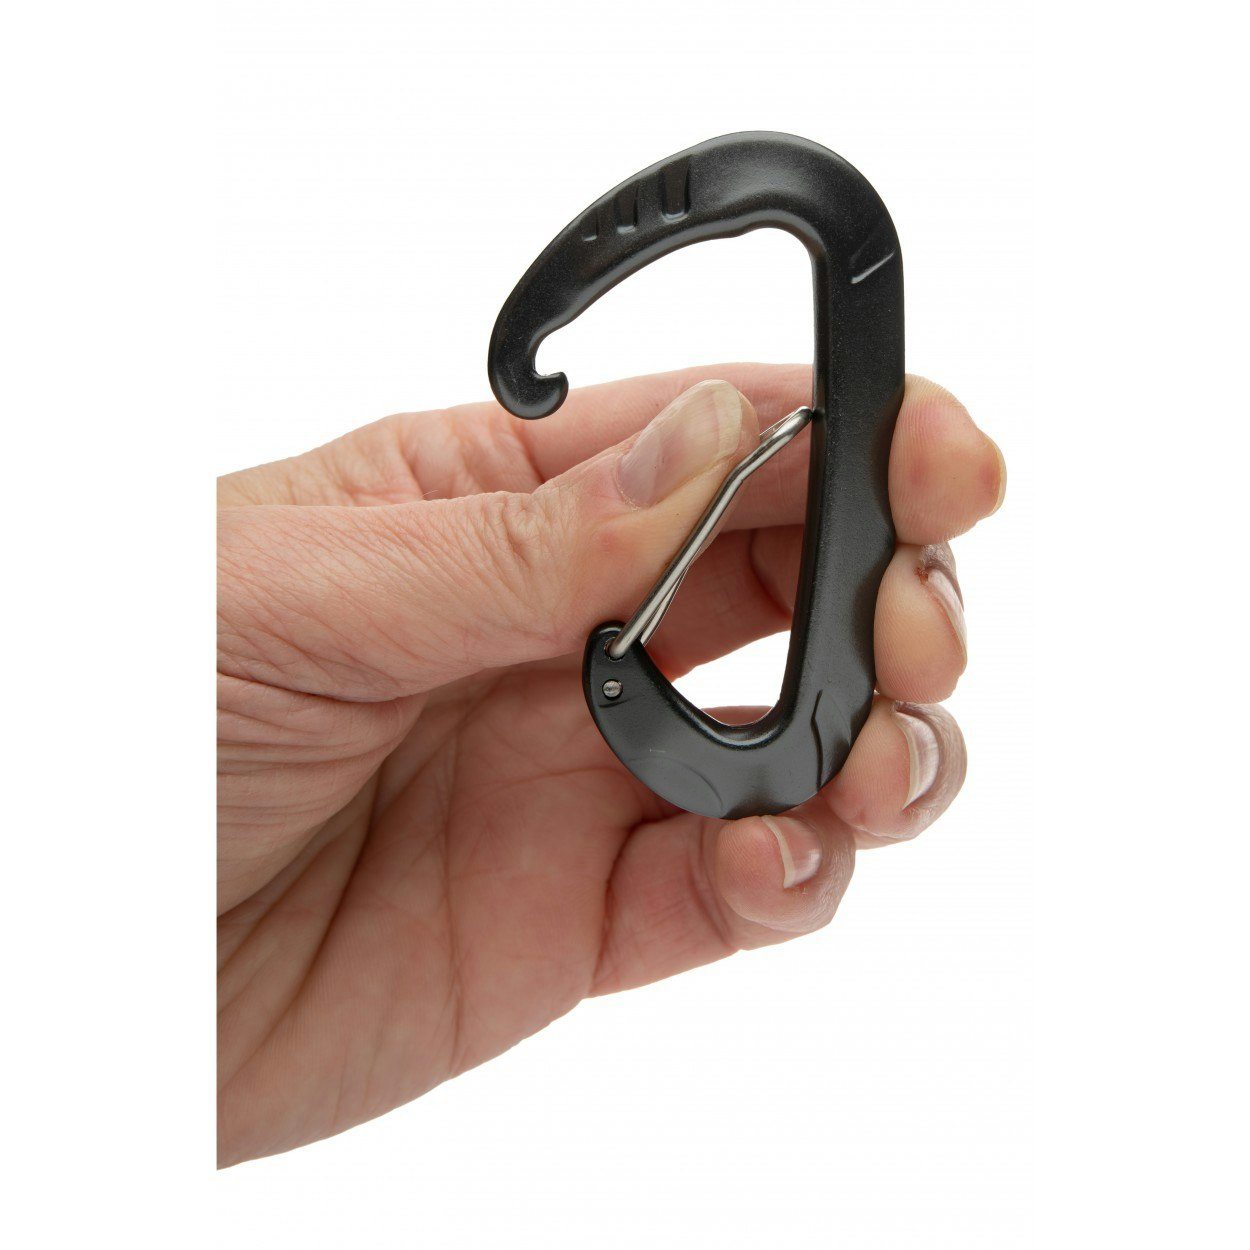 Survive Outdoors Longer Wiregate Utility Carabiners 2 Pack